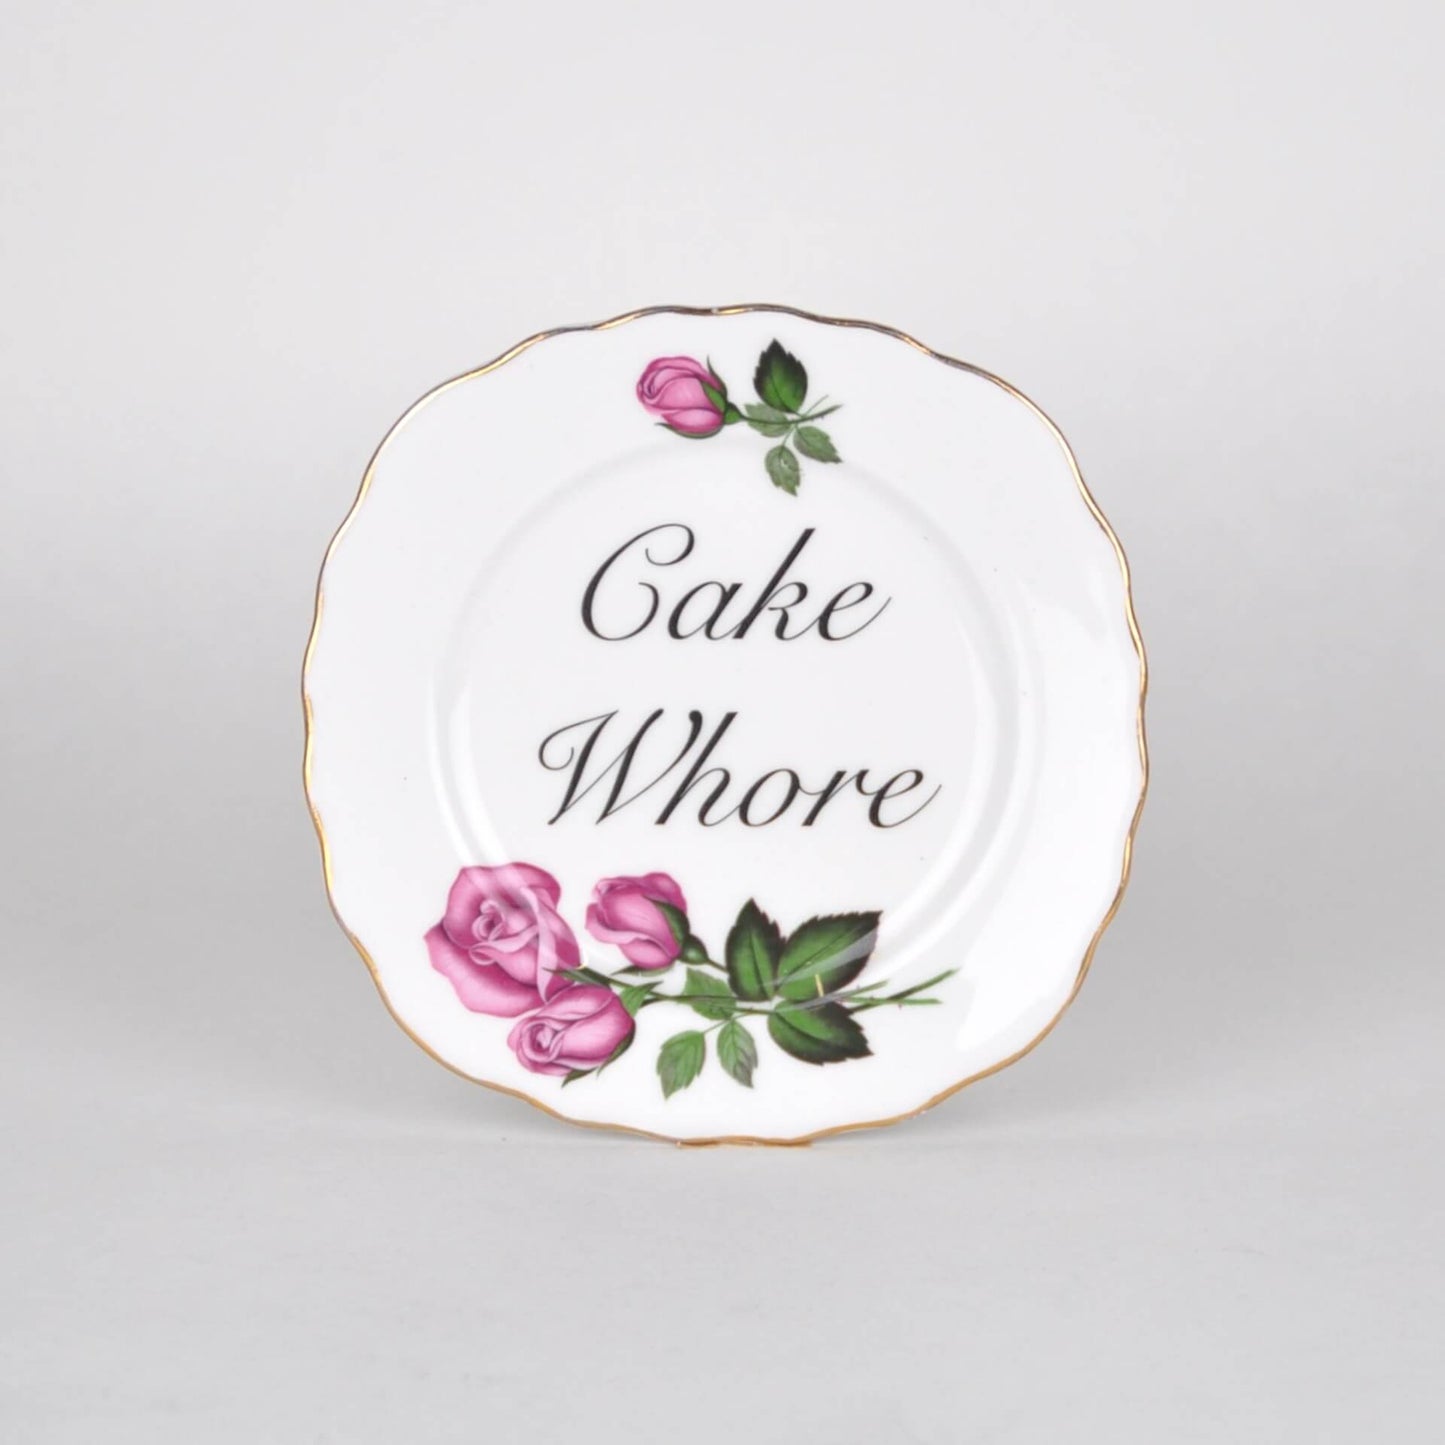 Beau & Badger Ceramics C Decorative Wall Plate - Cake Wh*re (various styles)